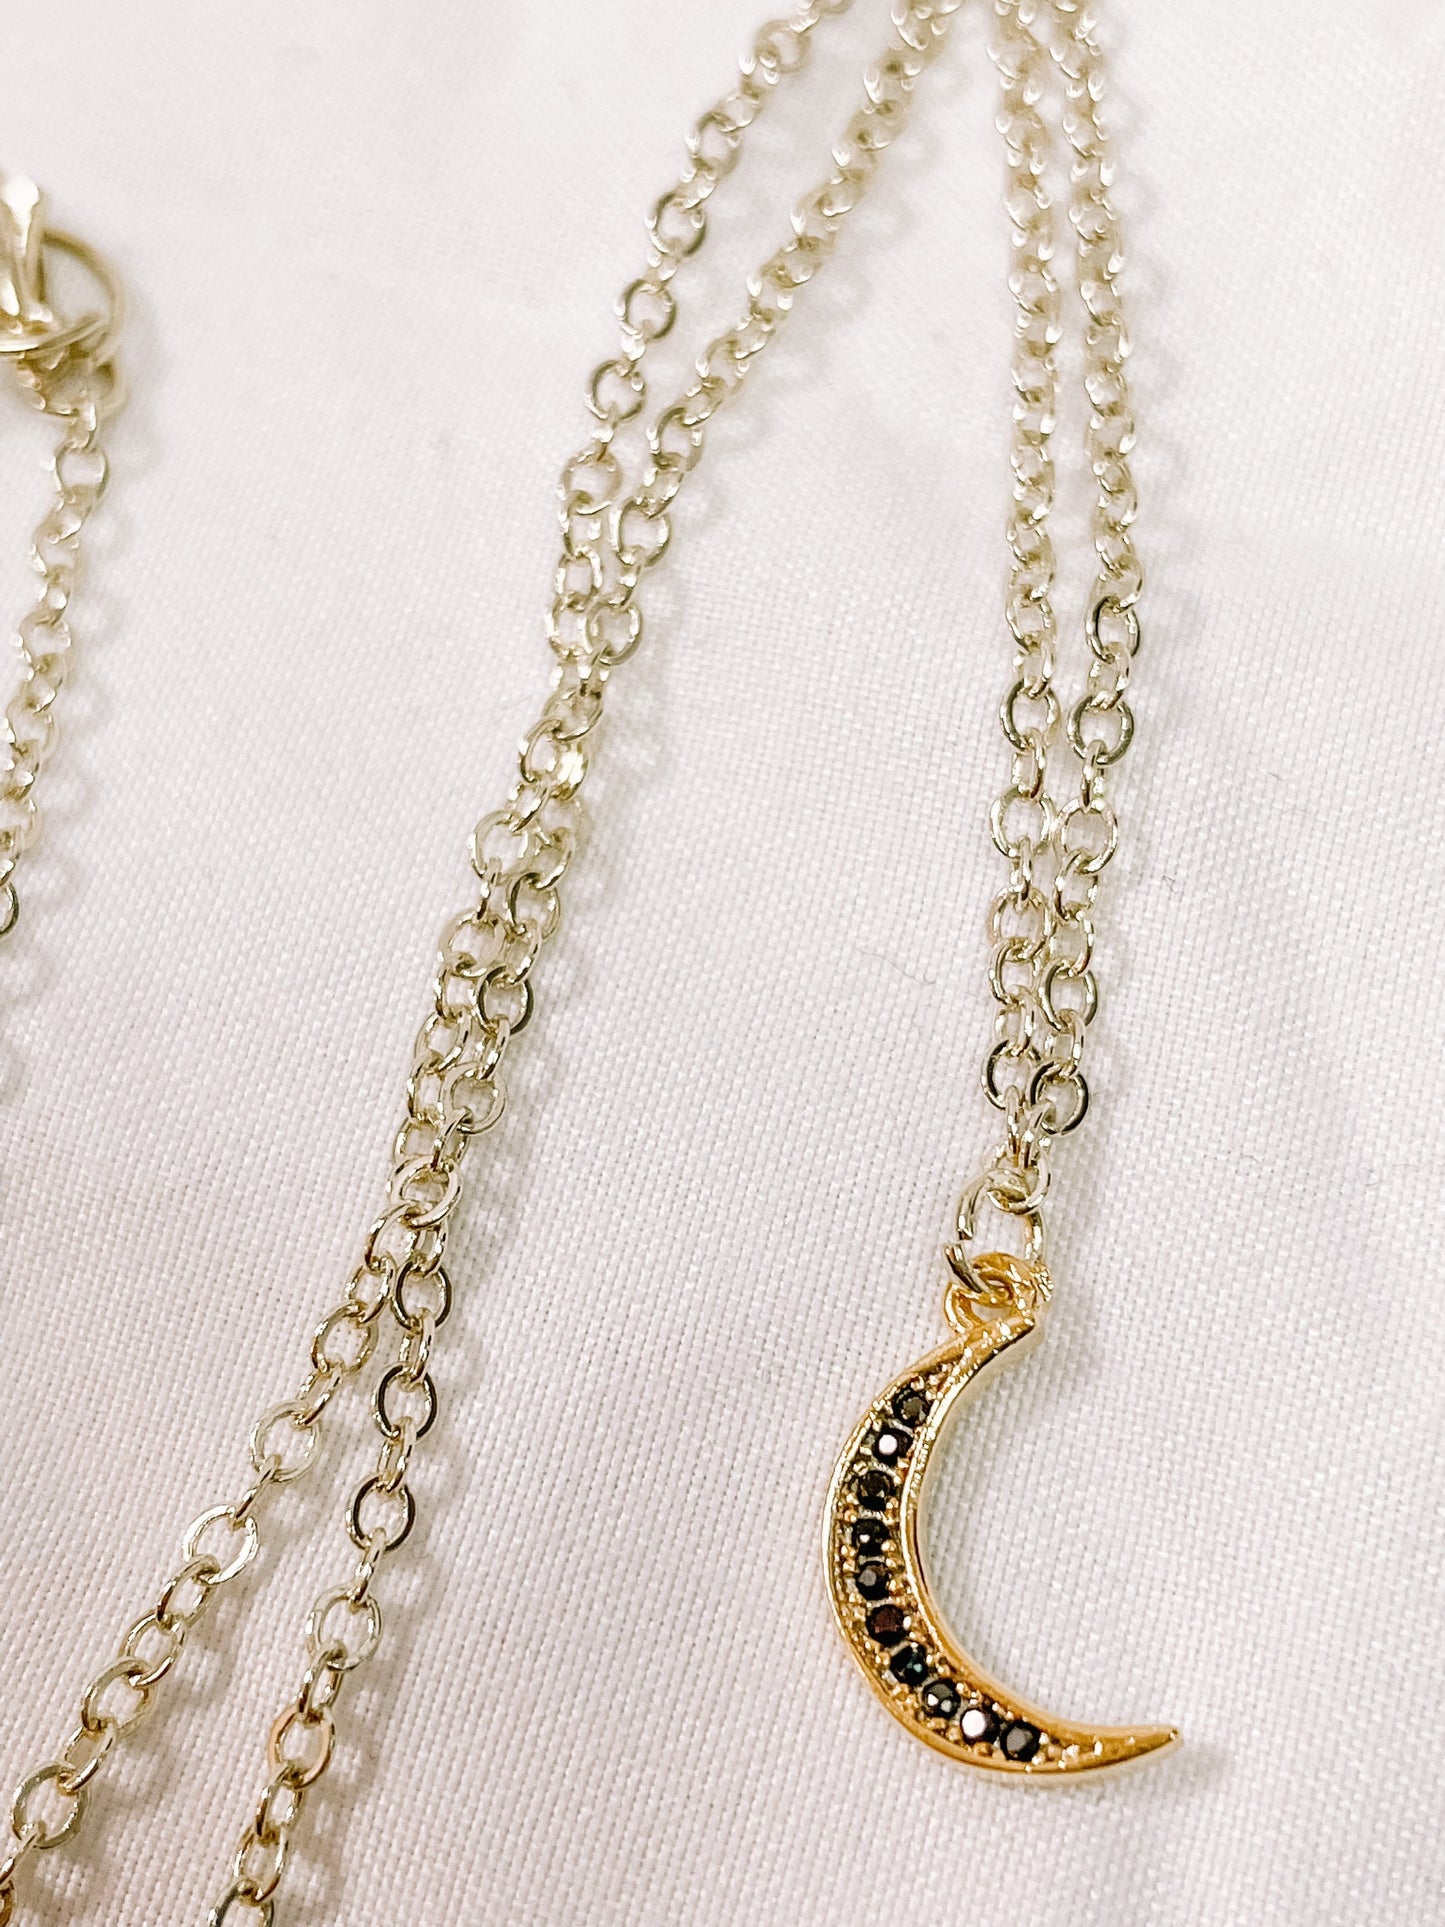 Studded moon charm necklace